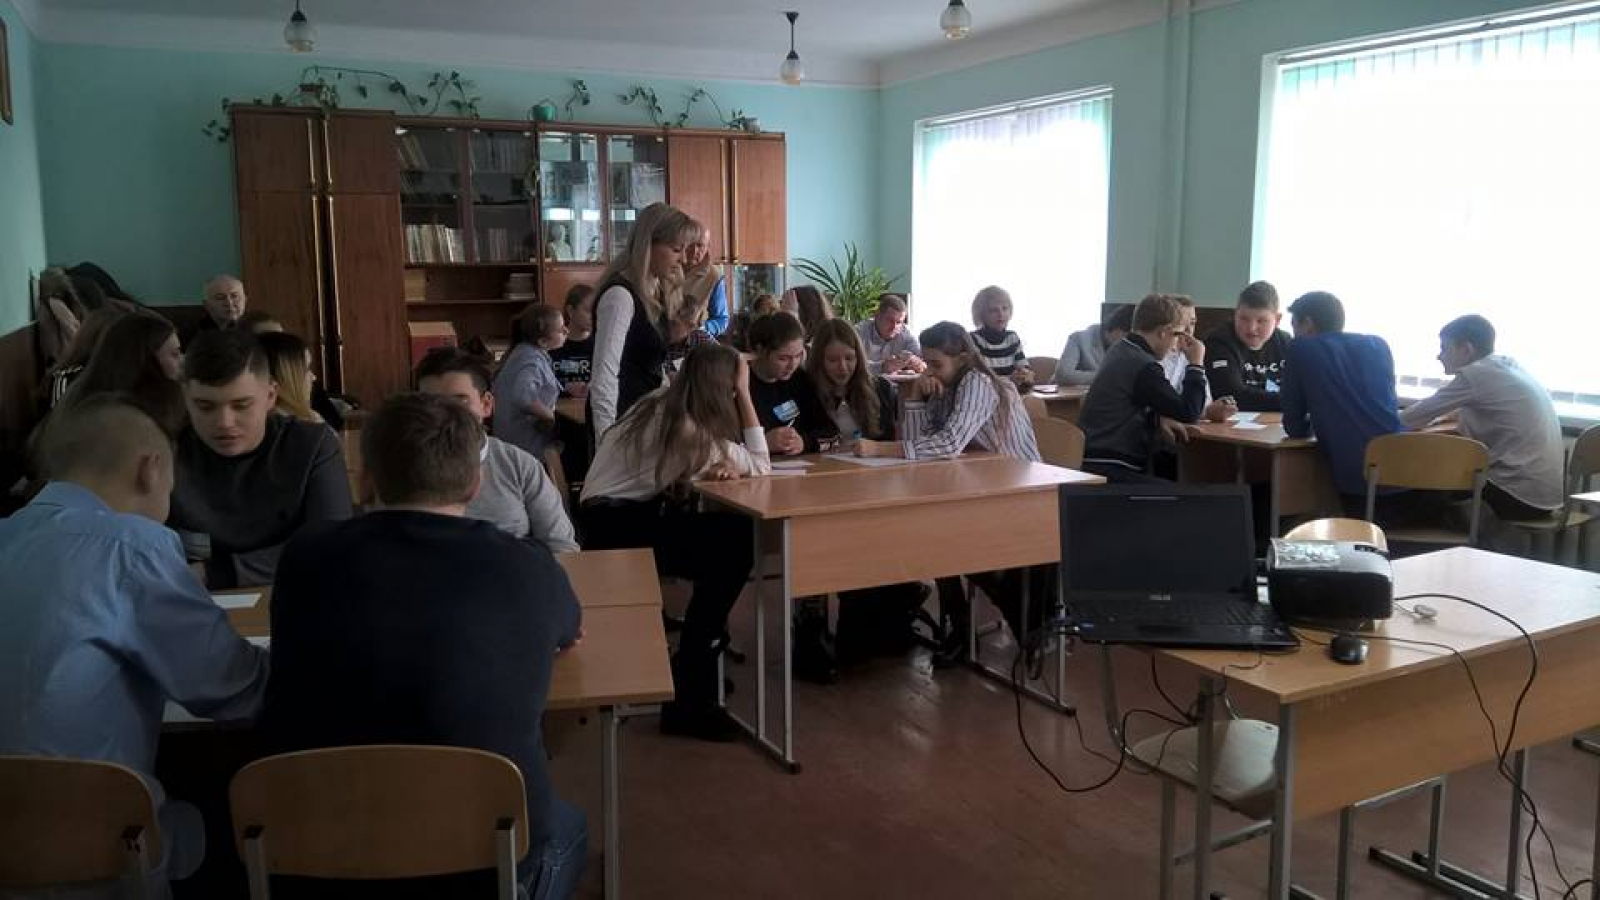 Ukraine: Young people in Dubno learn about energy efficiency thanks to EU 